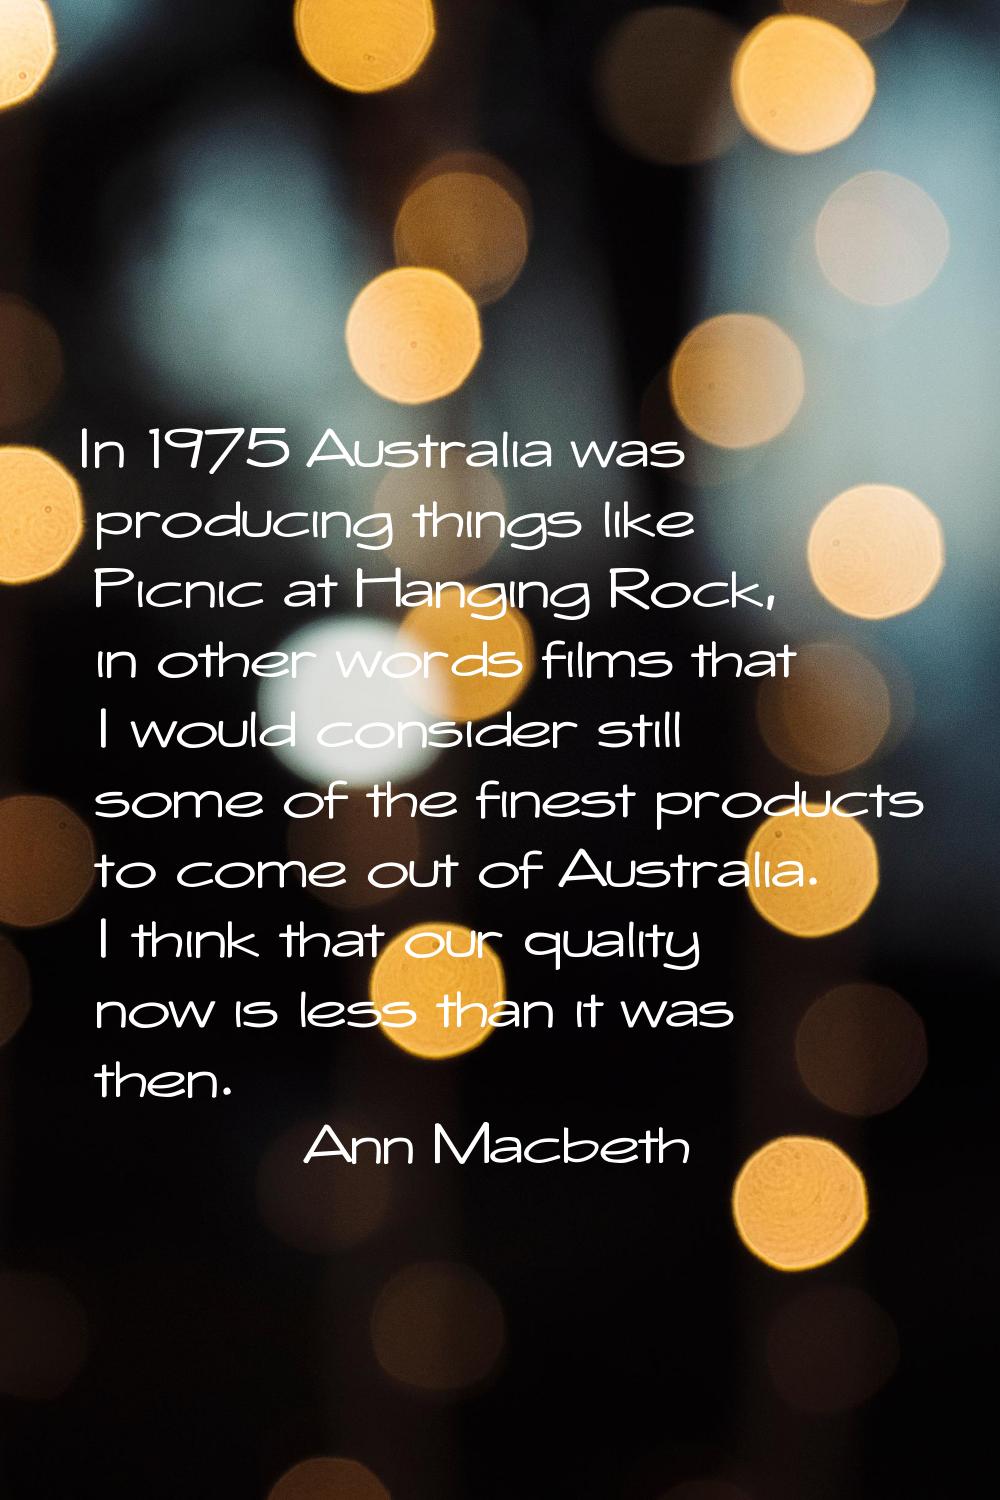 In 1975 Australia was producing things like Picnic at Hanging Rock, in other words films that I wou